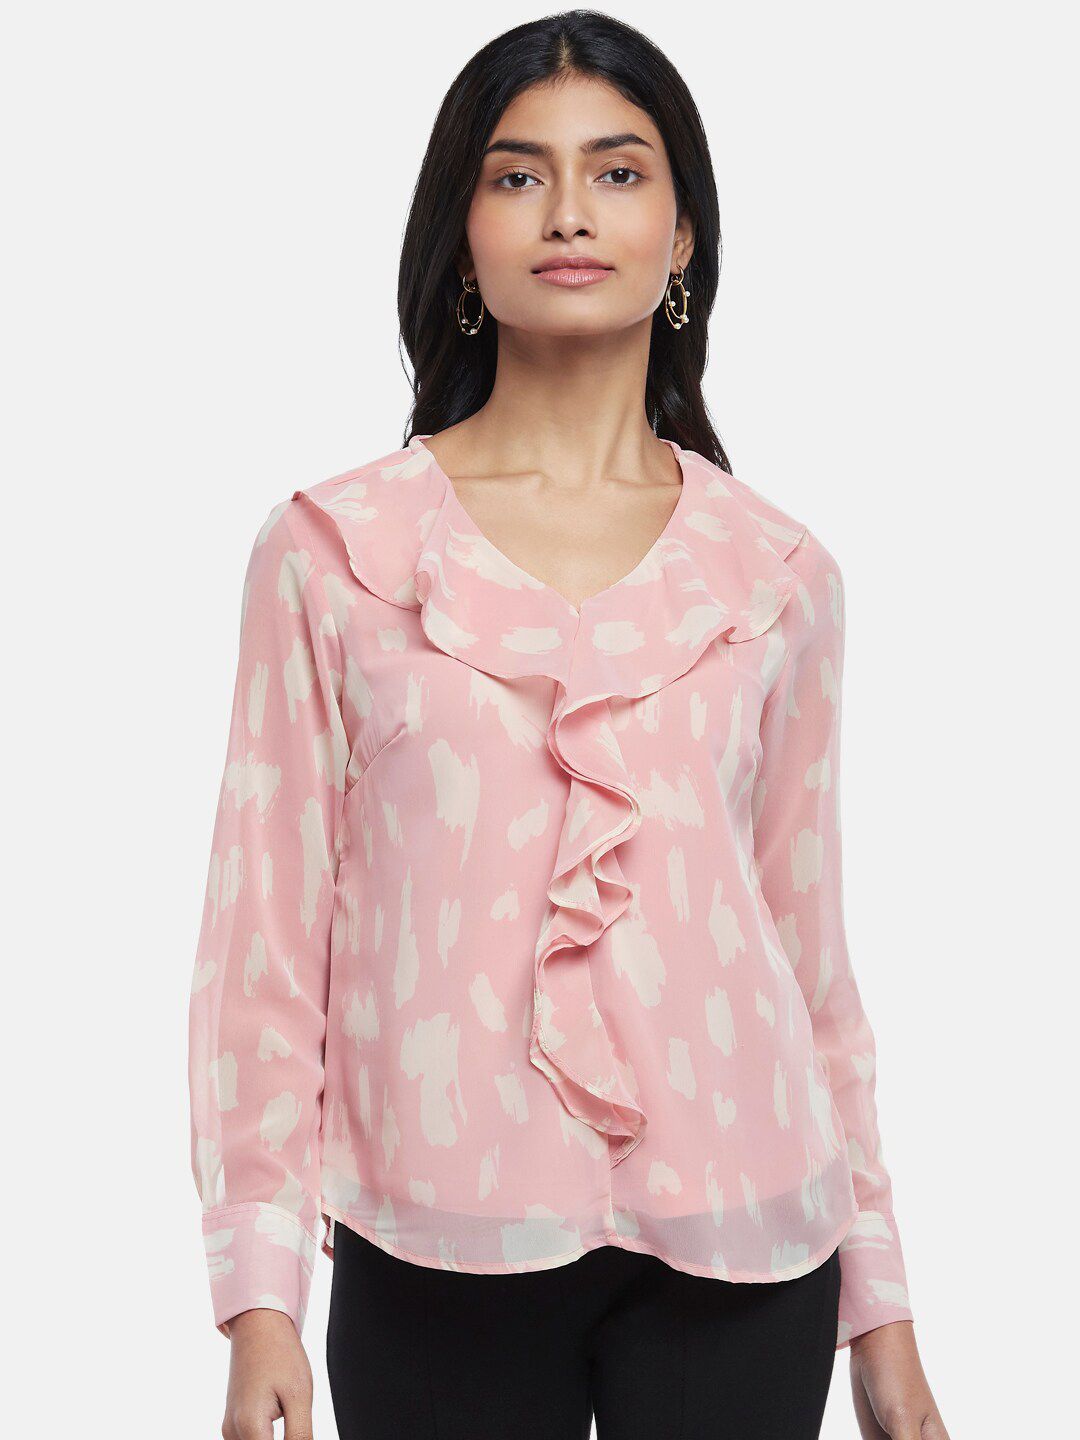 Annabelle by Pantaloons Pink Print Top Price in India